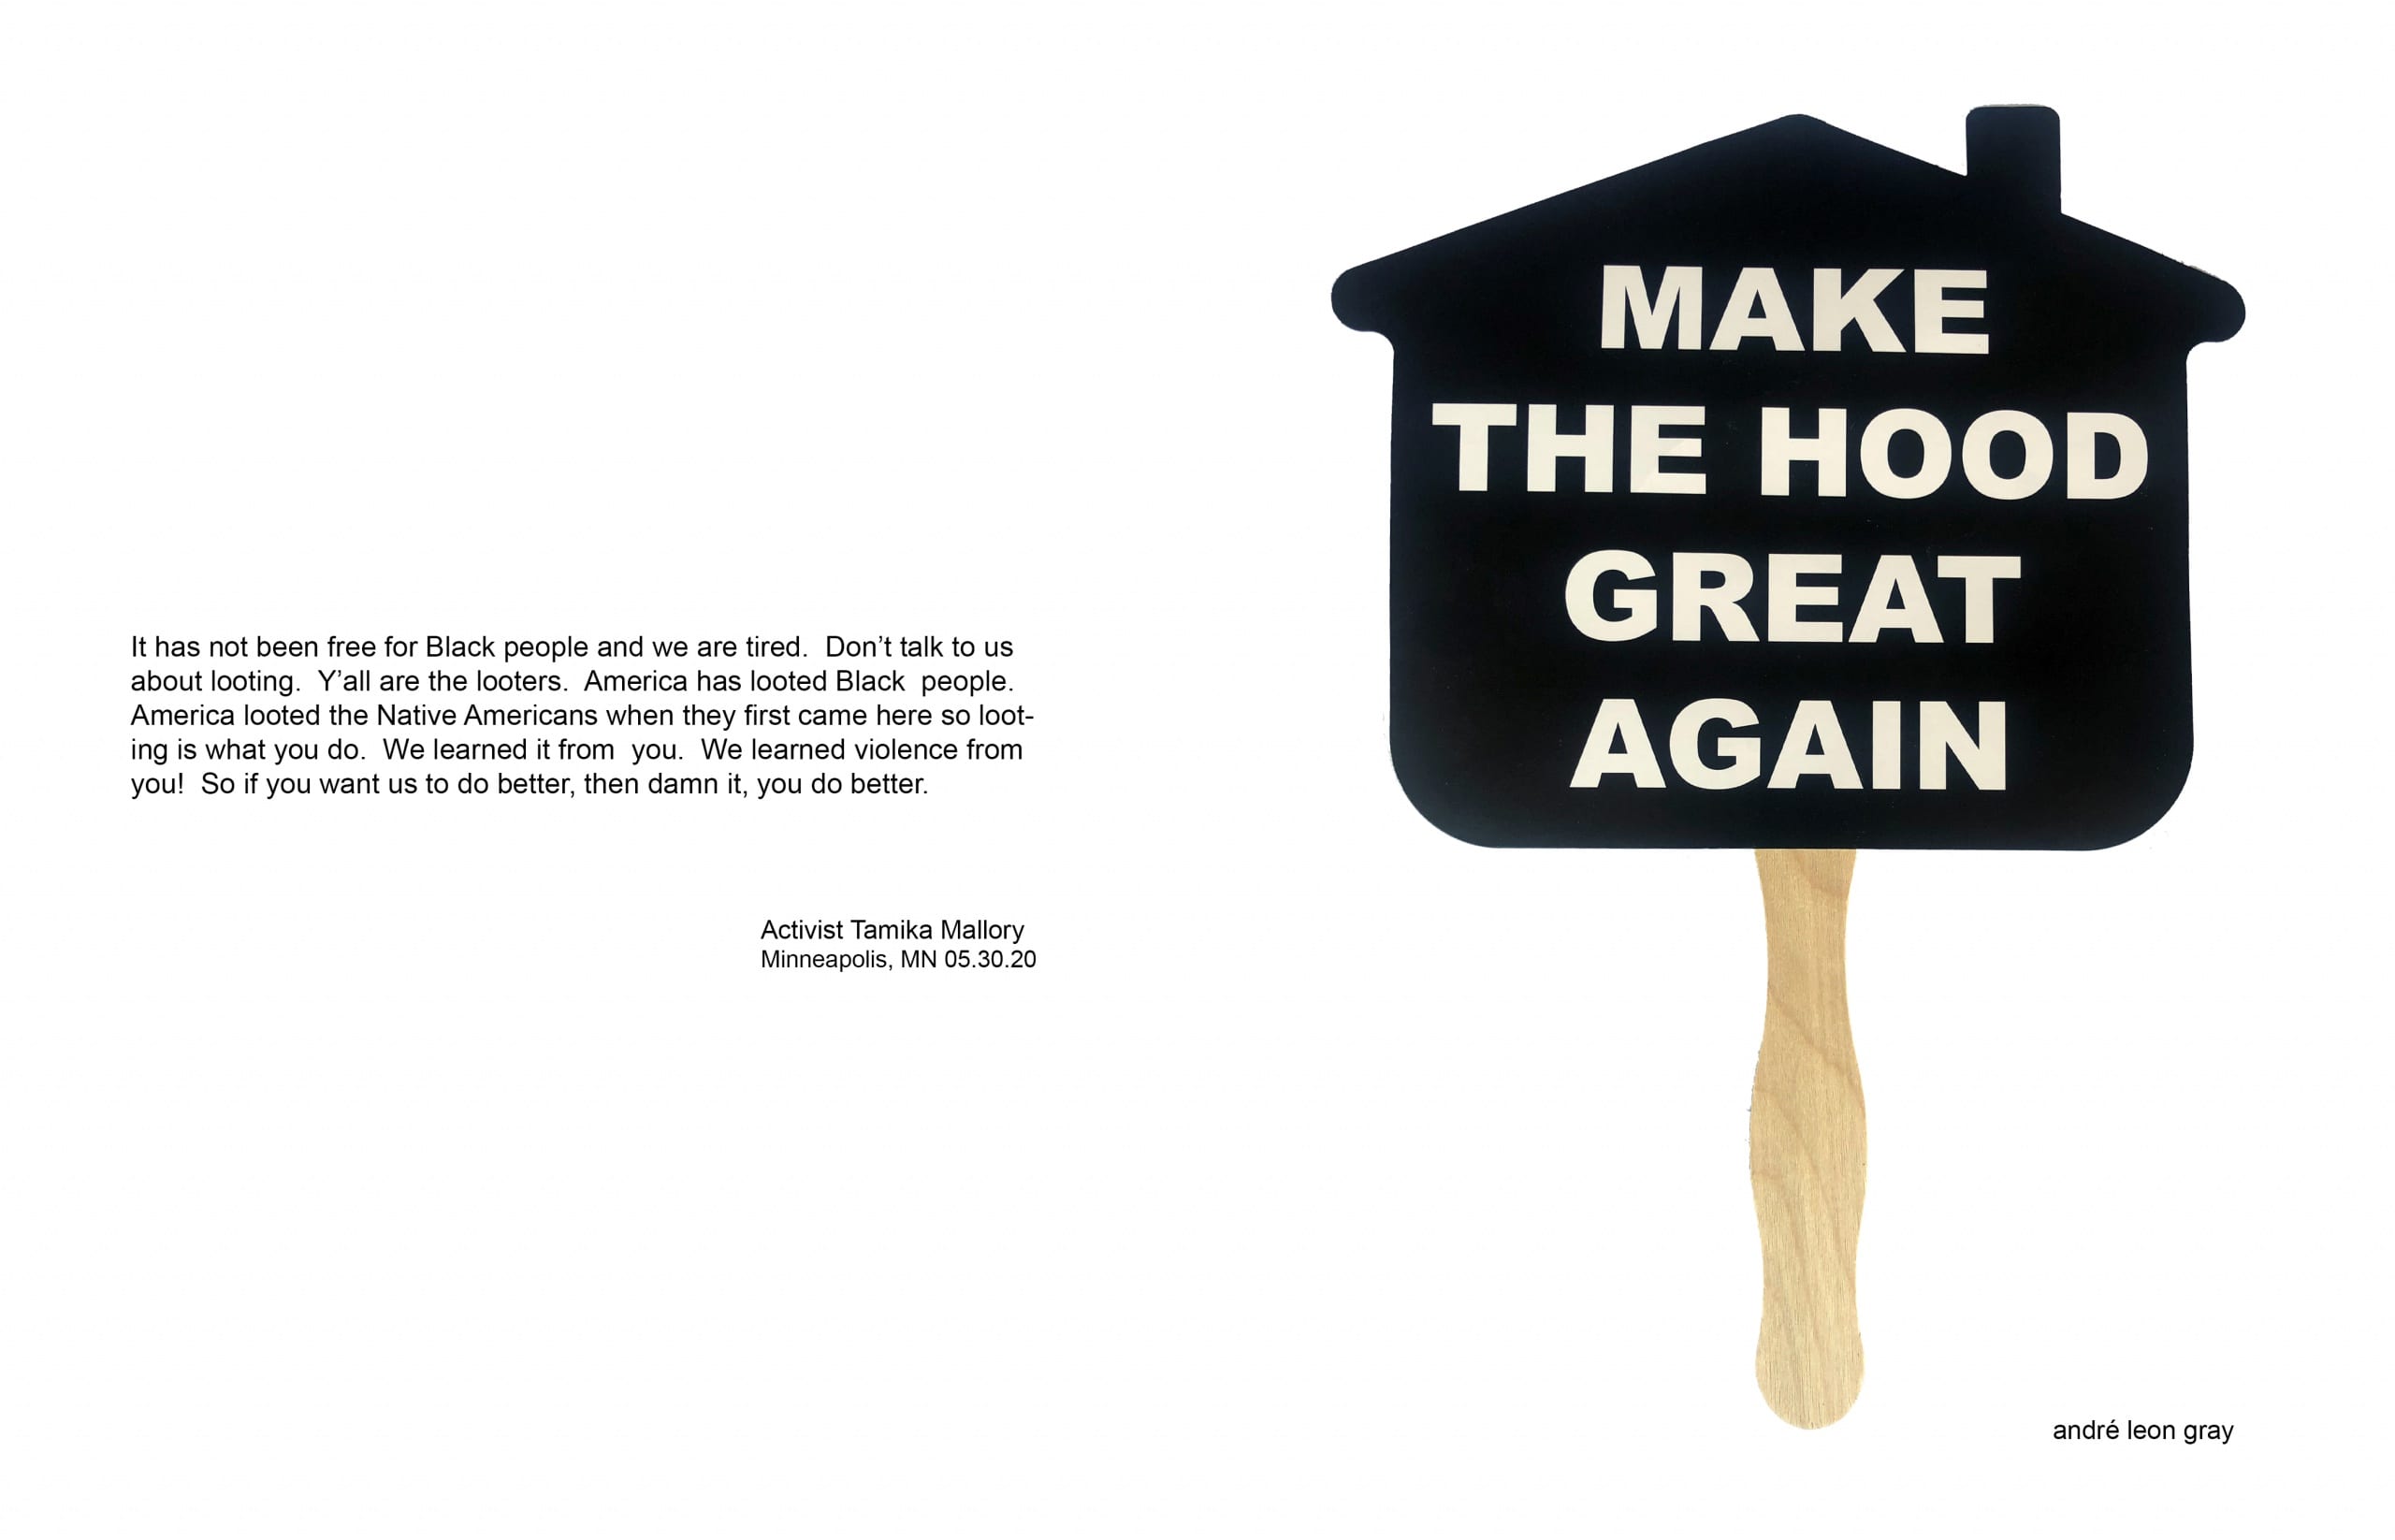 To left, a quote from activist Tamika Mallory; to right, a fan cut to resemble the silhouette of a house (with a small smokestack) with a slim wooden handle. Printed across the house's black silhouette, text reads "MAKE THE HOOD GREAT AGAIN" in all white bold capital letters